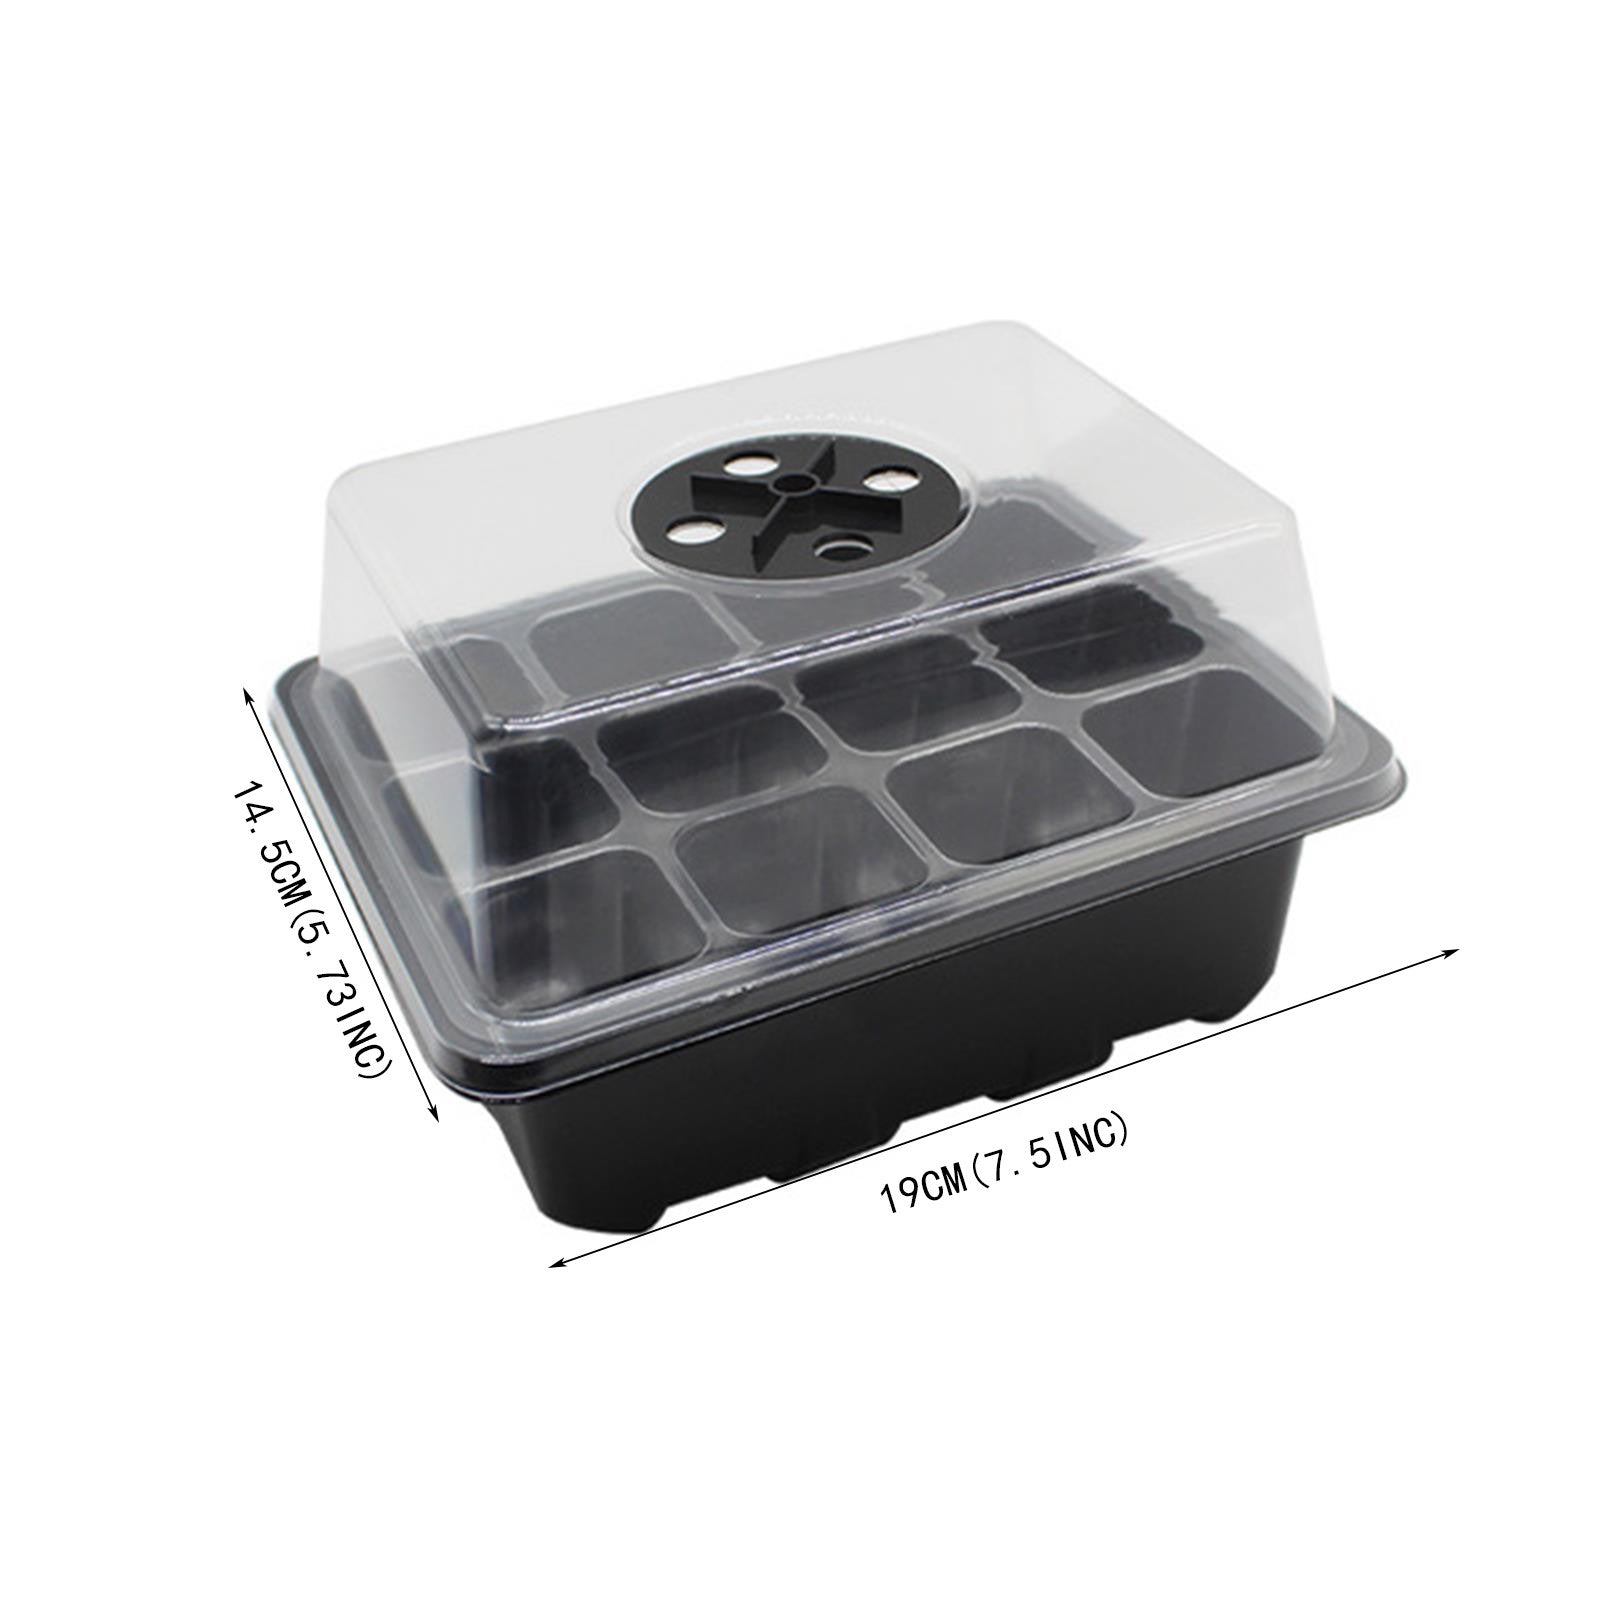 Hxroolrp 3 Pack Mini Greenhouse for Sowing Tray Sowing Tray with Lid 12 Cells per Tray